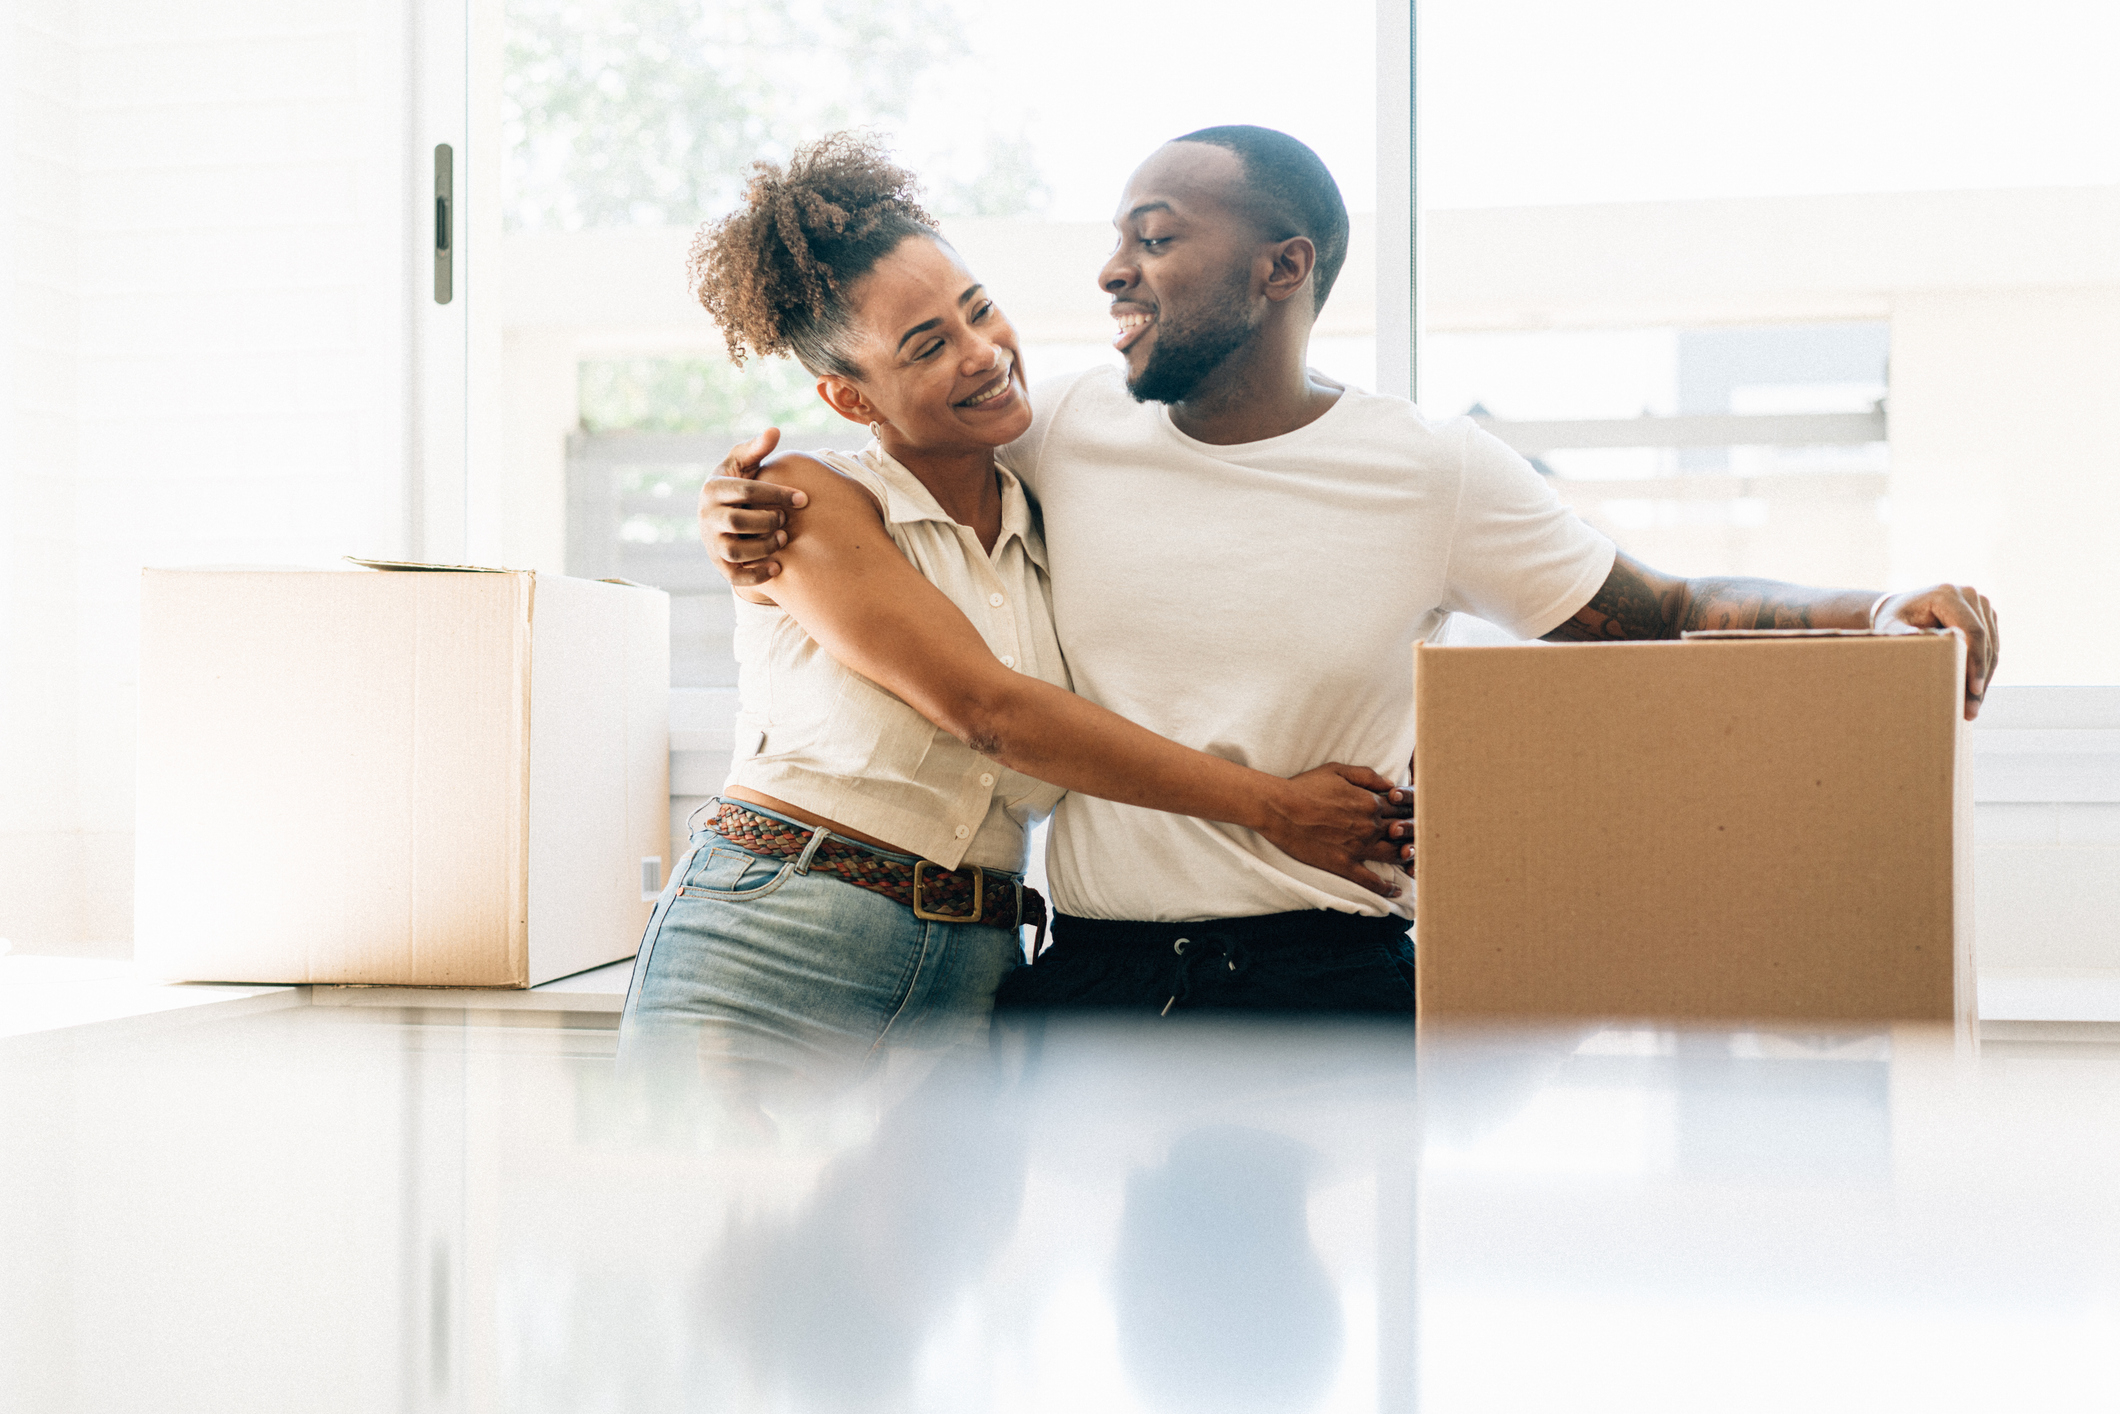 Couple embracing and smiling while sitting with a cardboard box suggesting moving in together